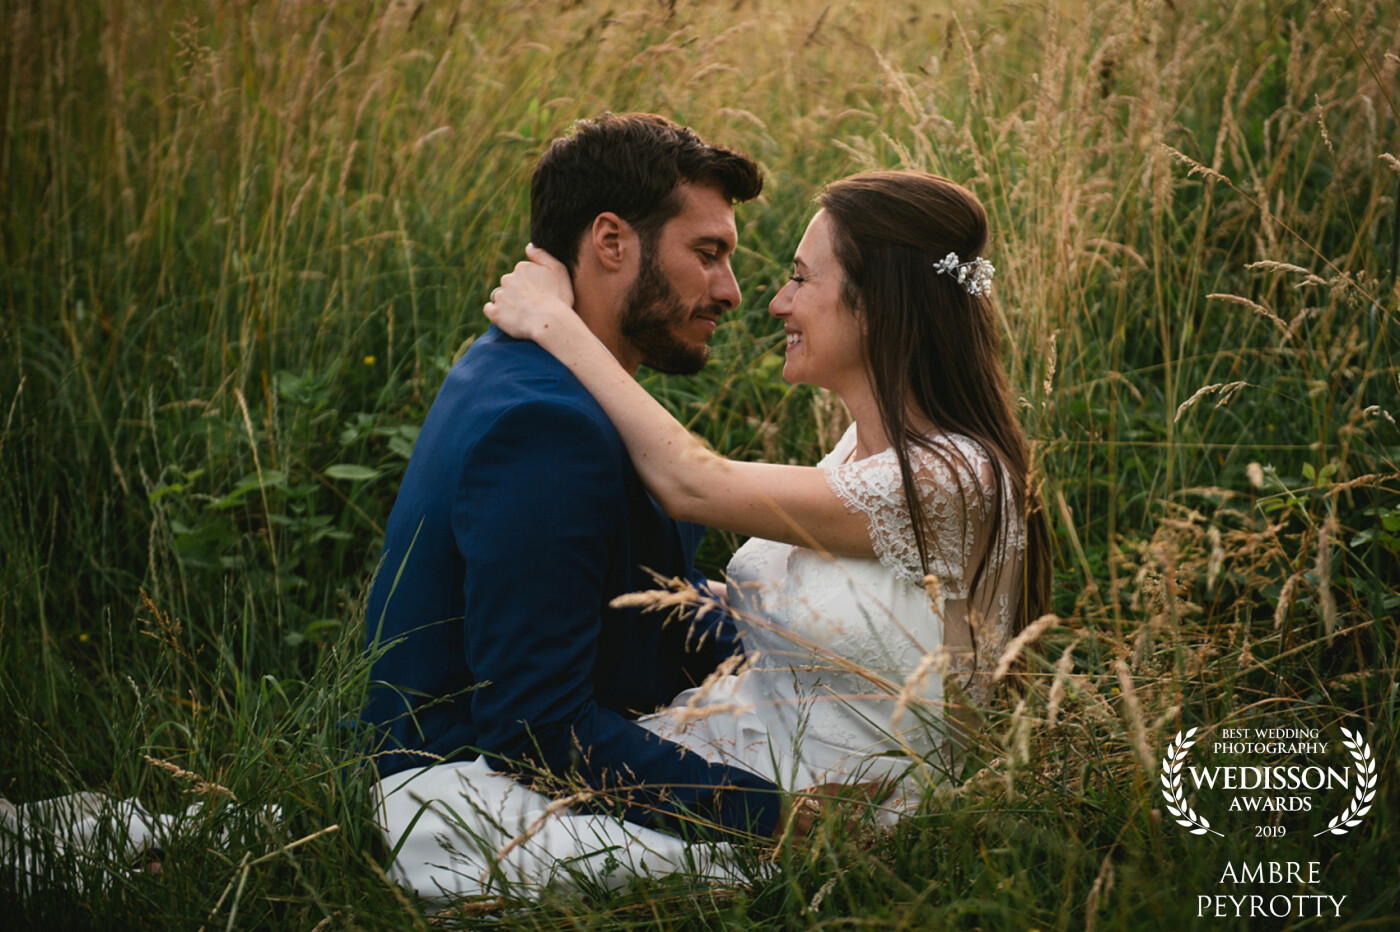 This lovely couple had such an incredible bond. They got married on a Saturday and hired me to do their couple pictures on the following Monday. I had so much fun and emotions organizing pictures for them!